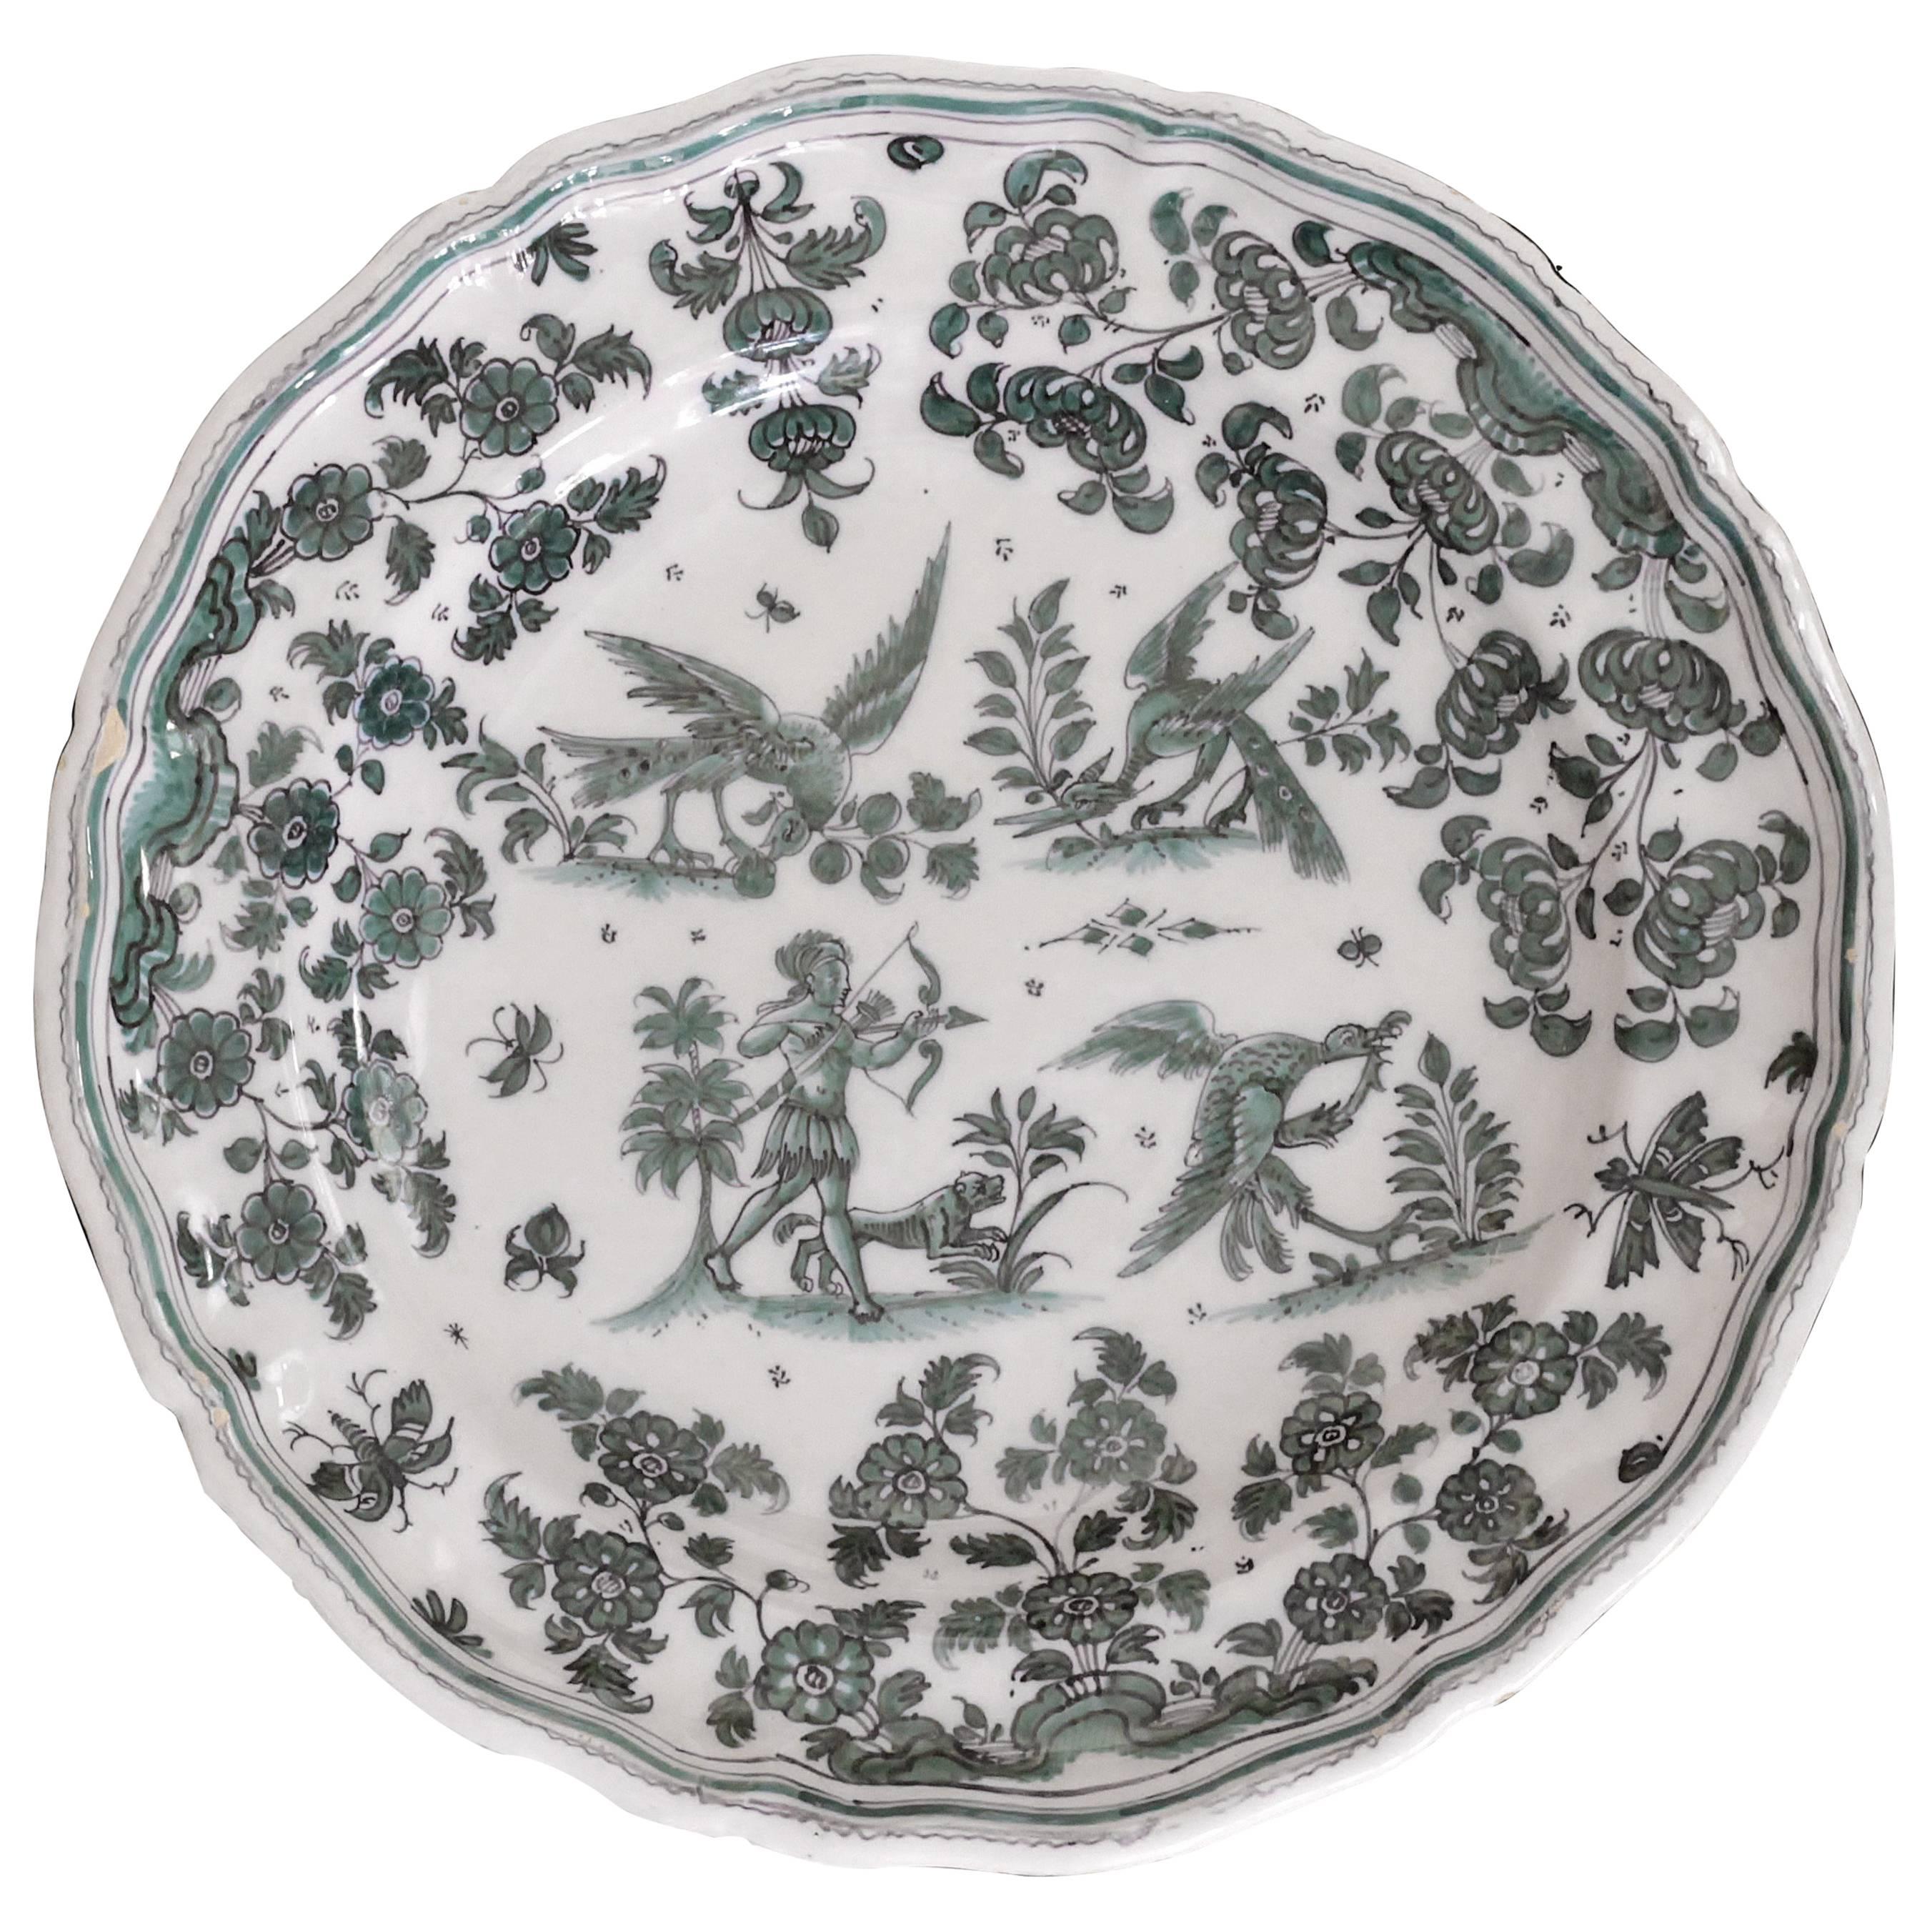 Moustiers 'France', 18th Century, Plate Earthenware with Grotesque Fantasy For Sale